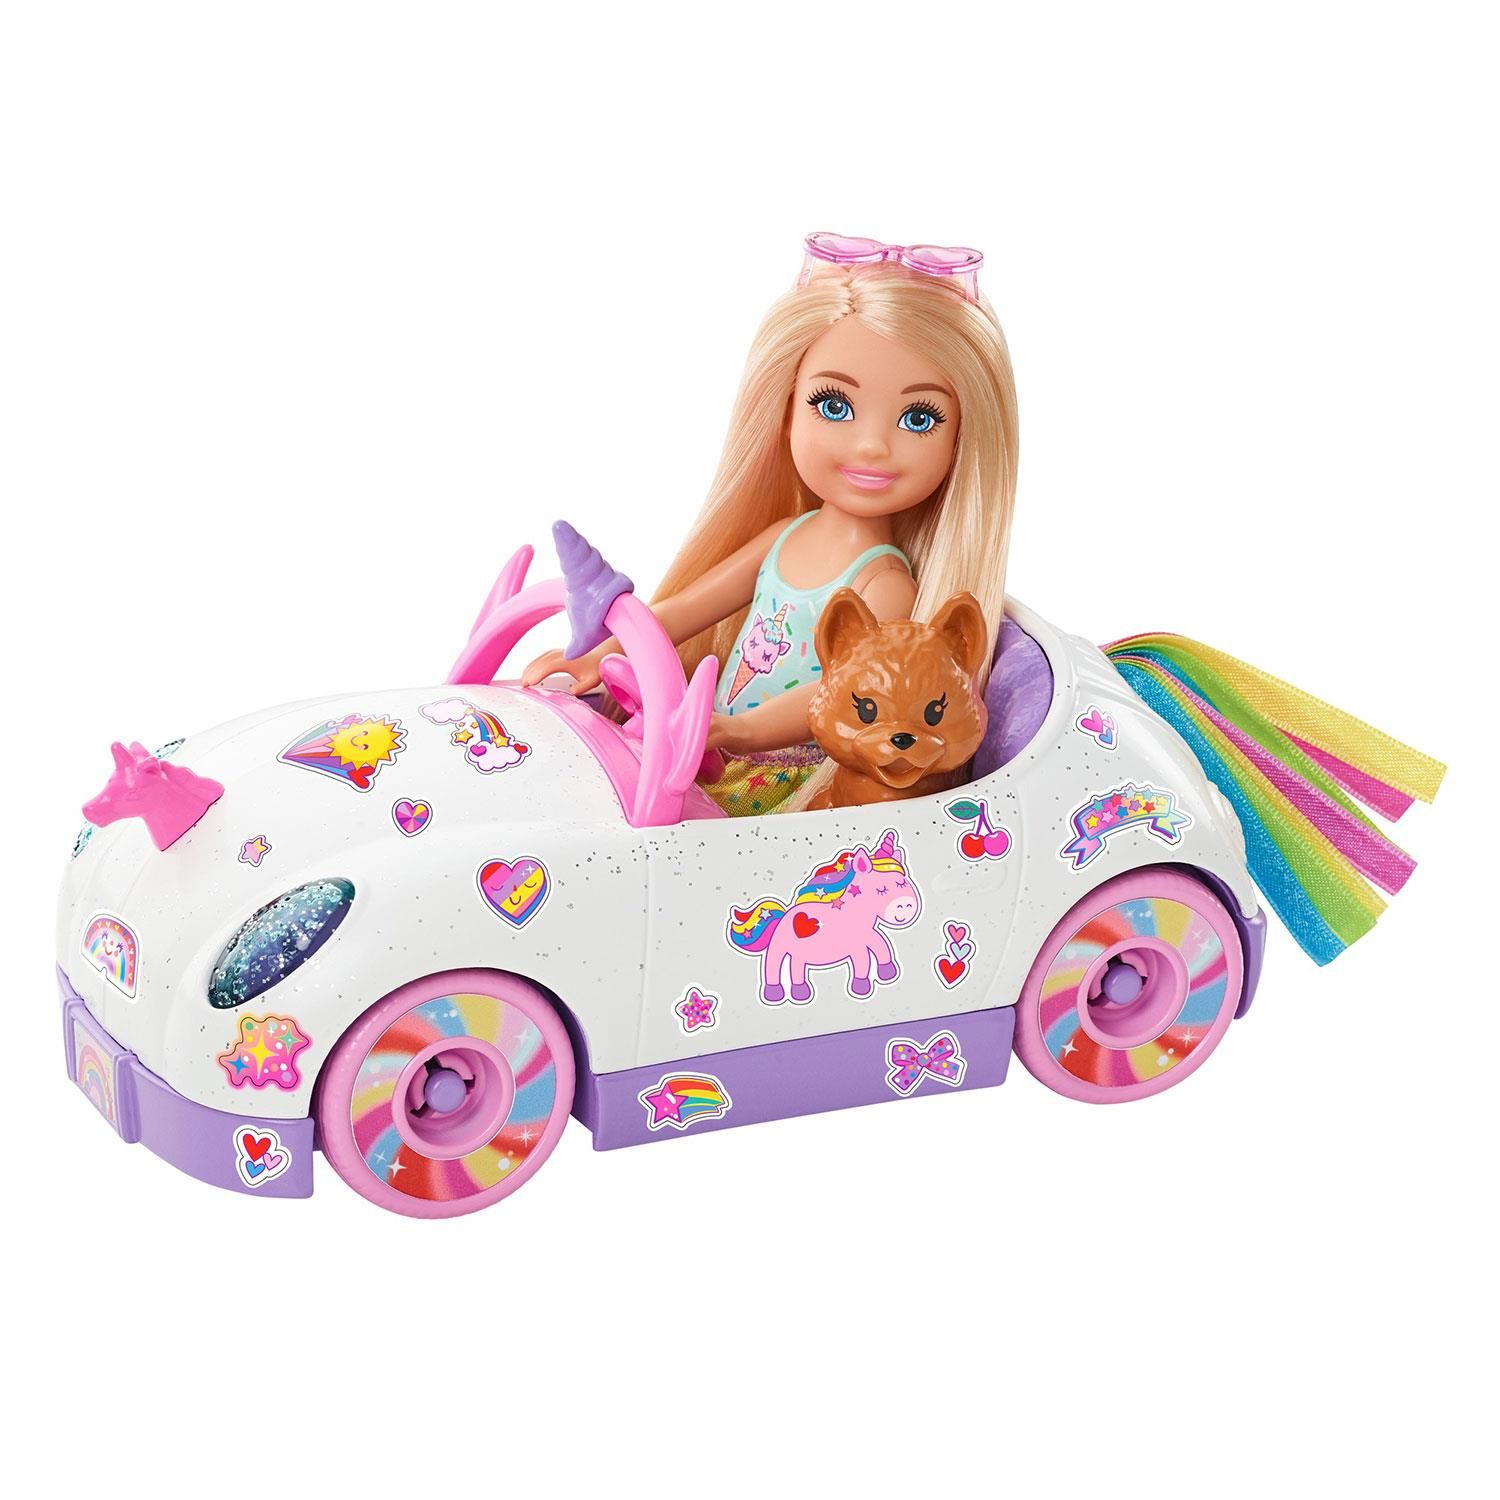 Barbie Fashionists Adventure Chelsea Doll with Unicorn-Themed Car Toy

Young imaginations will discover endless playtime possibilities with this Barbie unicorn-inspired car which comes with a Chelsea doll and puppy toy! This adorable open-top Barbie vehicle is glittery white with purple detailing and comes with a unicorn-themed hood ornament and rainbow streamer tail! Use the Barbie sticker sheet to customize the car with more cute decorations! Seat the Chelsea doll toy and her puppy friend in the car, and take them on all kinds of fun adventures! This Barbie Chelsea playset makes a great gift for ages 3+.

Features:

Hit the road and discover storytelling adventures with a 6-inch Chelsea doll, her pet puppy, and their adorable, unicorn-inspired car.
The sweet vehicle features open-top, rolling wheels, a unicorn hood ornament, and a rainbow streamer tail.
Use the sticker sheet to customize the ride, then seat Chelsea doll and her puppy inside and take it for a spin.
Chelsea doll is ready for any adventure in a unicorn-themed moulded top, Removeable tie-dye skirt, silvery shoes, and adorable pink sunglasses.
With so many sweet details, this Chelsea doll and car playset make a great gift for 3 to 7-year-olds.

Box contains:

1x Chelsea doll
1x Pet puppy
1x Car with unicorn hood ornament & Rainbow streamer tail
1x Sticker Sheet